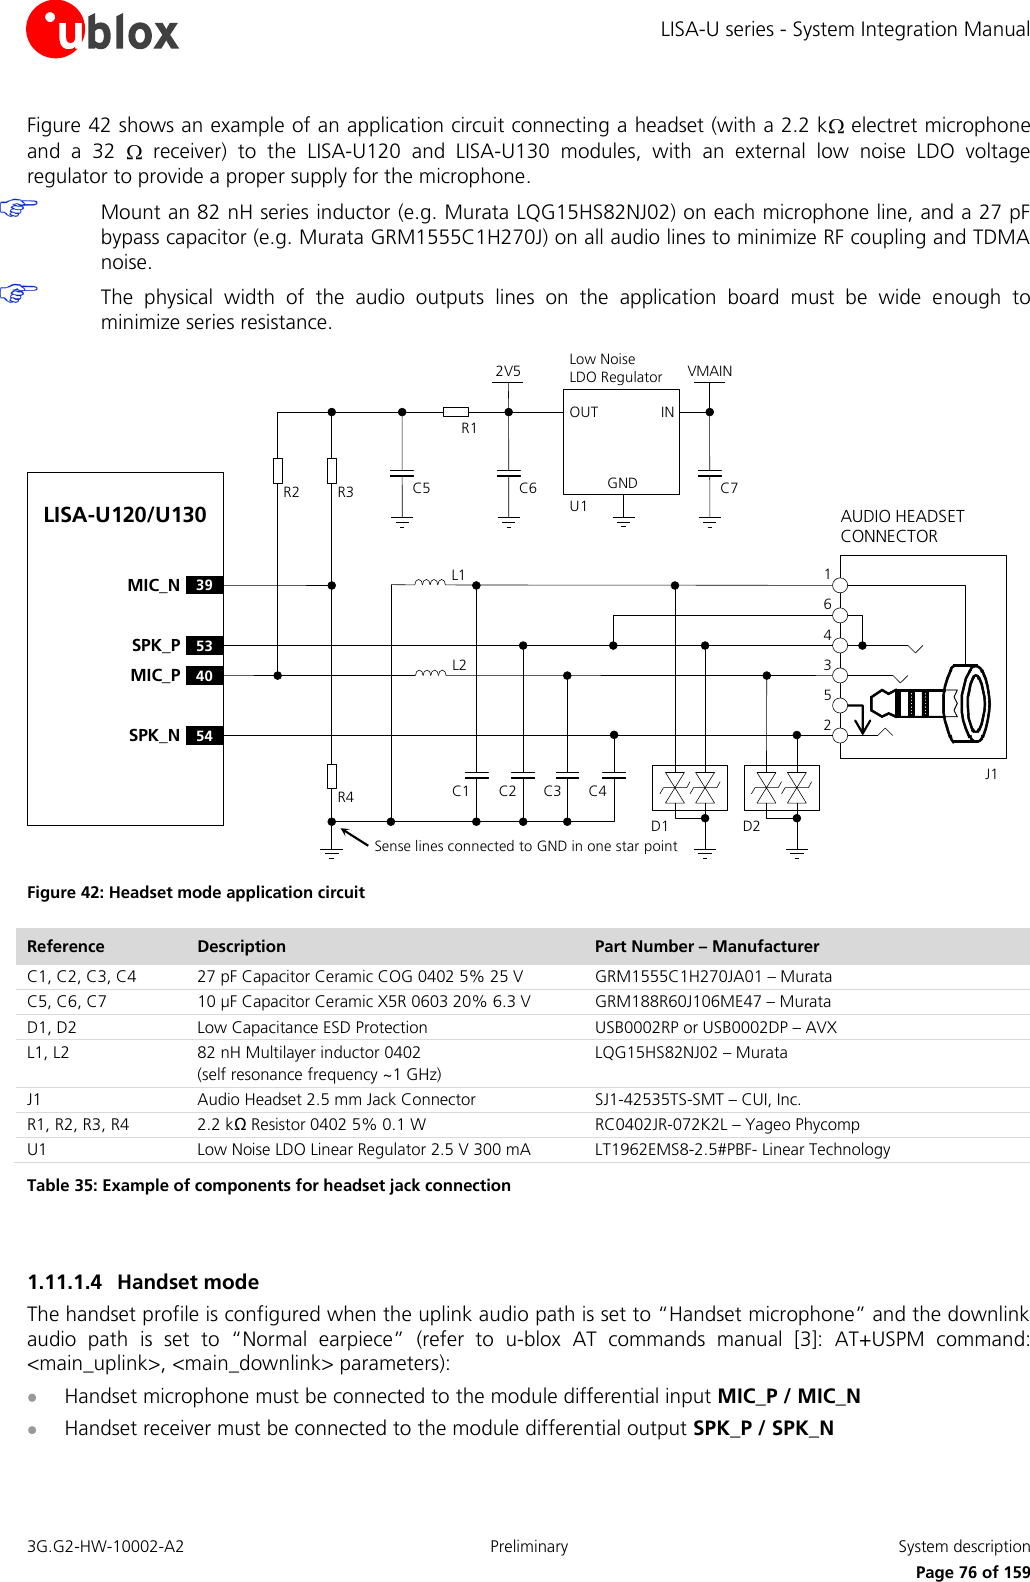 LISA-U series - System Integration Manual 3G.G2-HW-10002-A2  Preliminary  System description      Page 76 of 159 Figure 42 shows an example of an application circuit connecting a headset (with a 2.2 k  electret microphone and  a  32    receiver)  to  the  LISA-U120  and  LISA-U130  modules,  with  an  external  low  noise  LDO  voltage regulator to provide a proper supply for the microphone.  Mount an 82 nH series inductor (e.g. Murata LQG15HS82NJ02) on each microphone line, and a 27 pF bypass capacitor (e.g. Murata GRM1555C1H270J) on all audio lines to minimize RF coupling and TDMA noise.  The  physical  width  of  the  audio  outputs  lines  on  the  application  board  must  be  wide  enough  to minimize series resistance. LISA-U120/U130C2 C3 C4J1253461L254SPK_N53SPK_P39MIC_N40MIC_PD1AUDIO HEADSET CONNECTORD2INOUTGNDLow Noise LDO Regulator VMAINU1R4R1C6R3R2 C52V5Sense lines connected to GND in one star pointL1C1C7 Figure 42: Headset mode application circuit Reference Description Part Number – Manufacturer C1, C2, C3, C4 27 pF Capacitor Ceramic COG 0402 5% 25 V  GRM1555C1H270JA01 – Murata C5, C6, C7 10 µF Capacitor Ceramic X5R 0603 20% 6.3 V GRM188R60J106ME47 – Murata D1, D2 Low Capacitance ESD Protection USB0002RP or USB0002DP – AVX L1, L2 82 nH Multilayer inductor 0402 (self resonance frequency ~1 GHz) LQG15HS82NJ02 – Murata J1 Audio Headset 2.5 mm Jack Connector SJ1-42535TS-SMT – CUI, Inc. R1, R2, R3, R4 2.2 kΩ Resistor 0402 5% 0.1 W  RC0402JR-072K2L – Yageo Phycomp U1 Low Noise LDO Linear Regulator 2.5 V 300 mA LT1962EMS8-2.5#PBF- Linear Technology Table 35: Example of components for headset jack connection  1.11.1.4 Handset mode The handset profile is configured when the uplink audio path is set to “Handset microphone” and the downlink audio  path  is  set  to  “Normal  earpiece”  (refer  to  u-blox AT  commands  manual [3]:  AT+USPM  command: &lt;main_uplink&gt;, &lt;main_downlink&gt; parameters):  Handset microphone must be connected to the module differential input MIC_P / MIC_N  Handset receiver must be connected to the module differential output SPK_P / SPK_N 